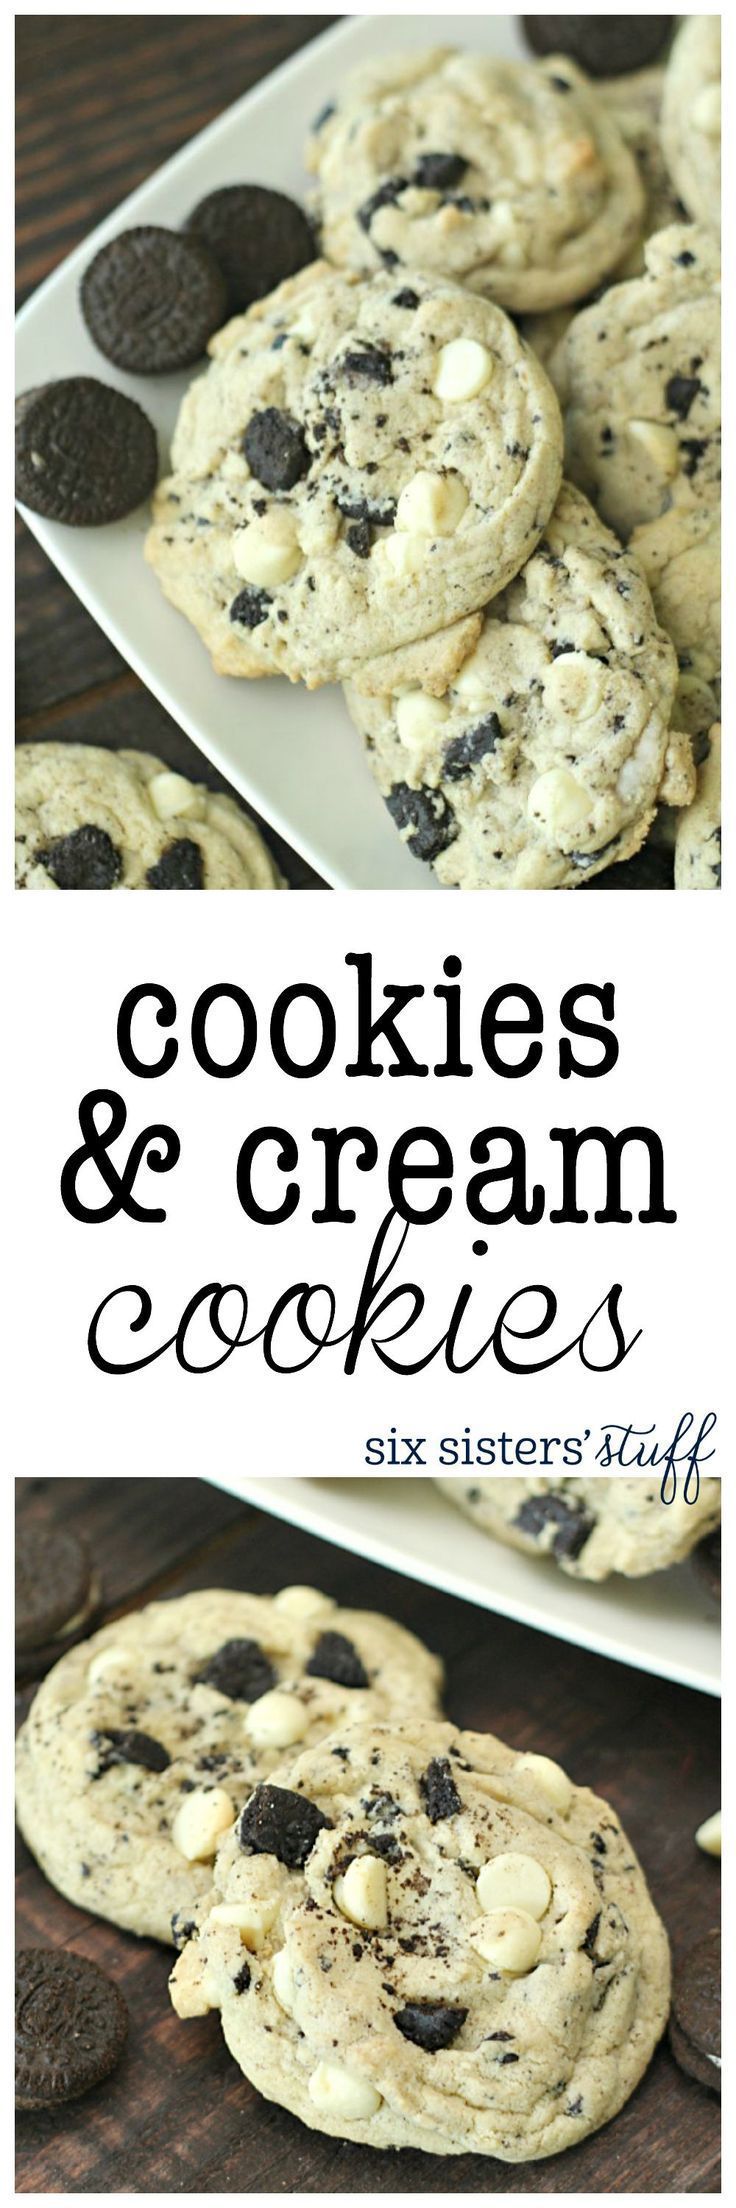 Cookies and Cream Cookies recipe from SixSistersStuff.com | These cookies are loaded with Oreo’s and the secret ingredient is a